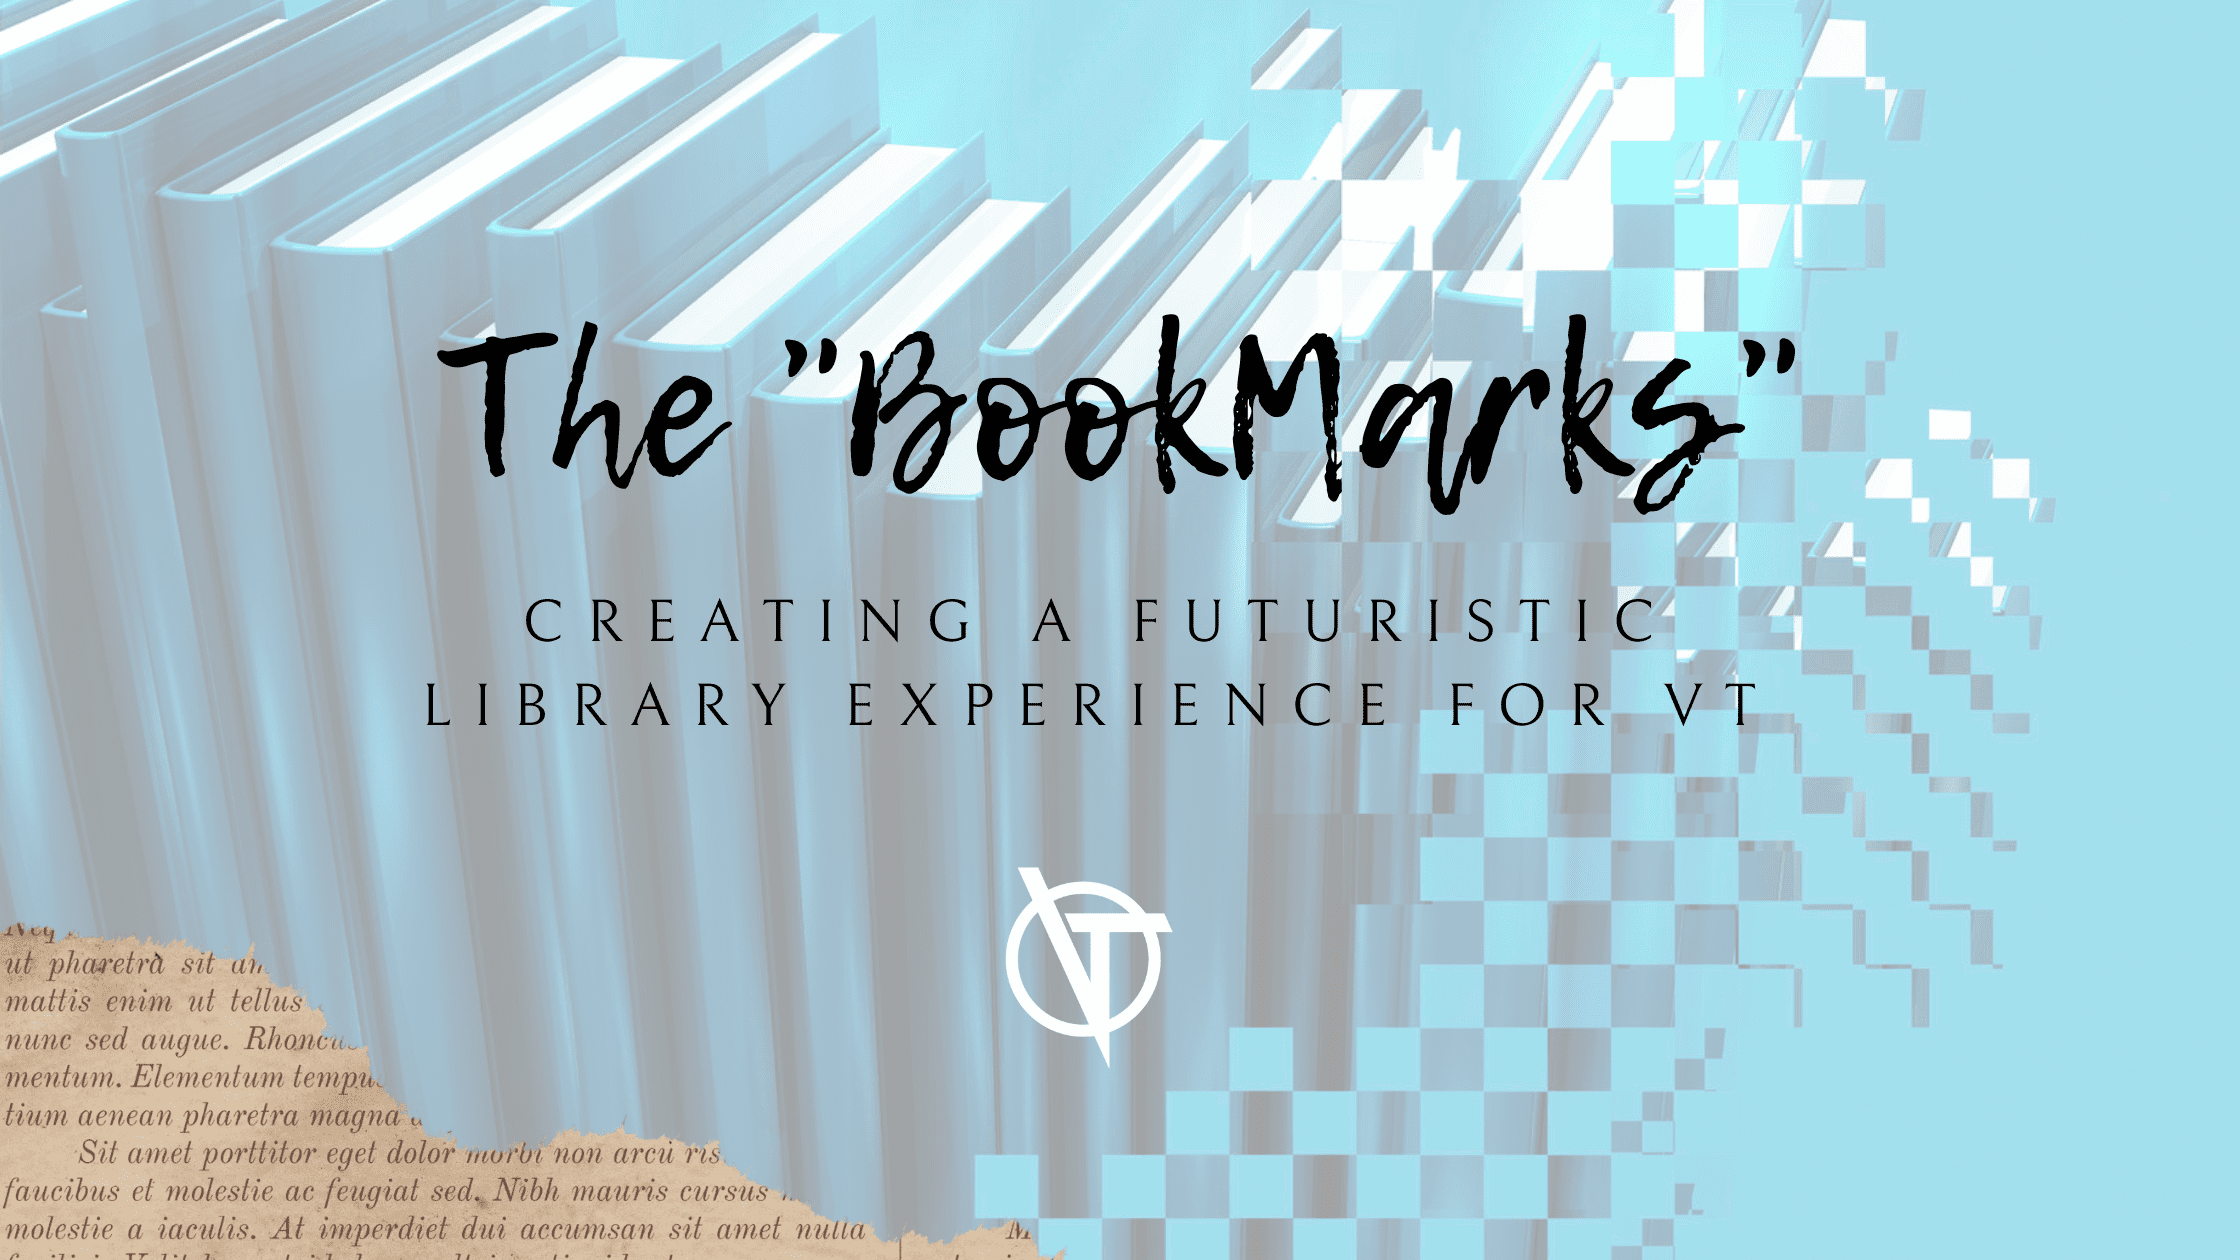 The BookMarks – Creating a Futuristic Library Experience for VT